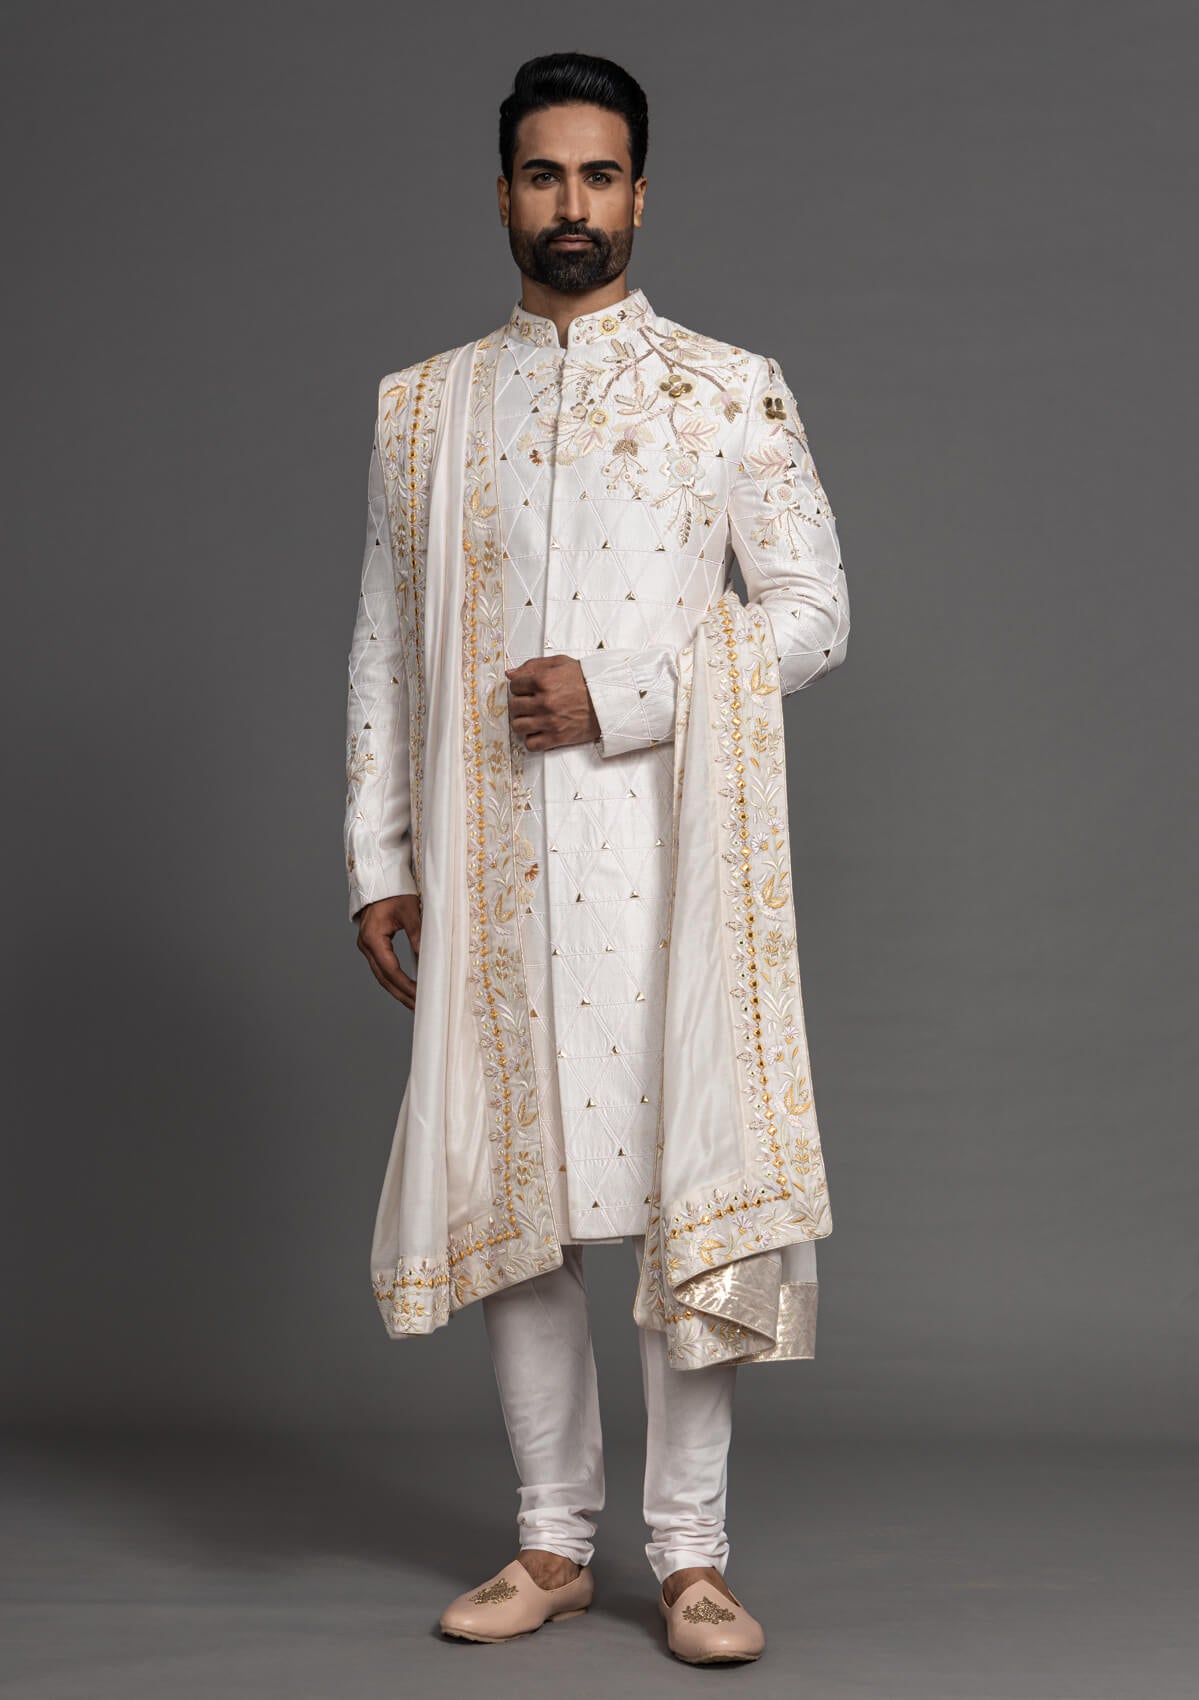 AMIRA Sherwani ensemble for a regal and sophisticated look.